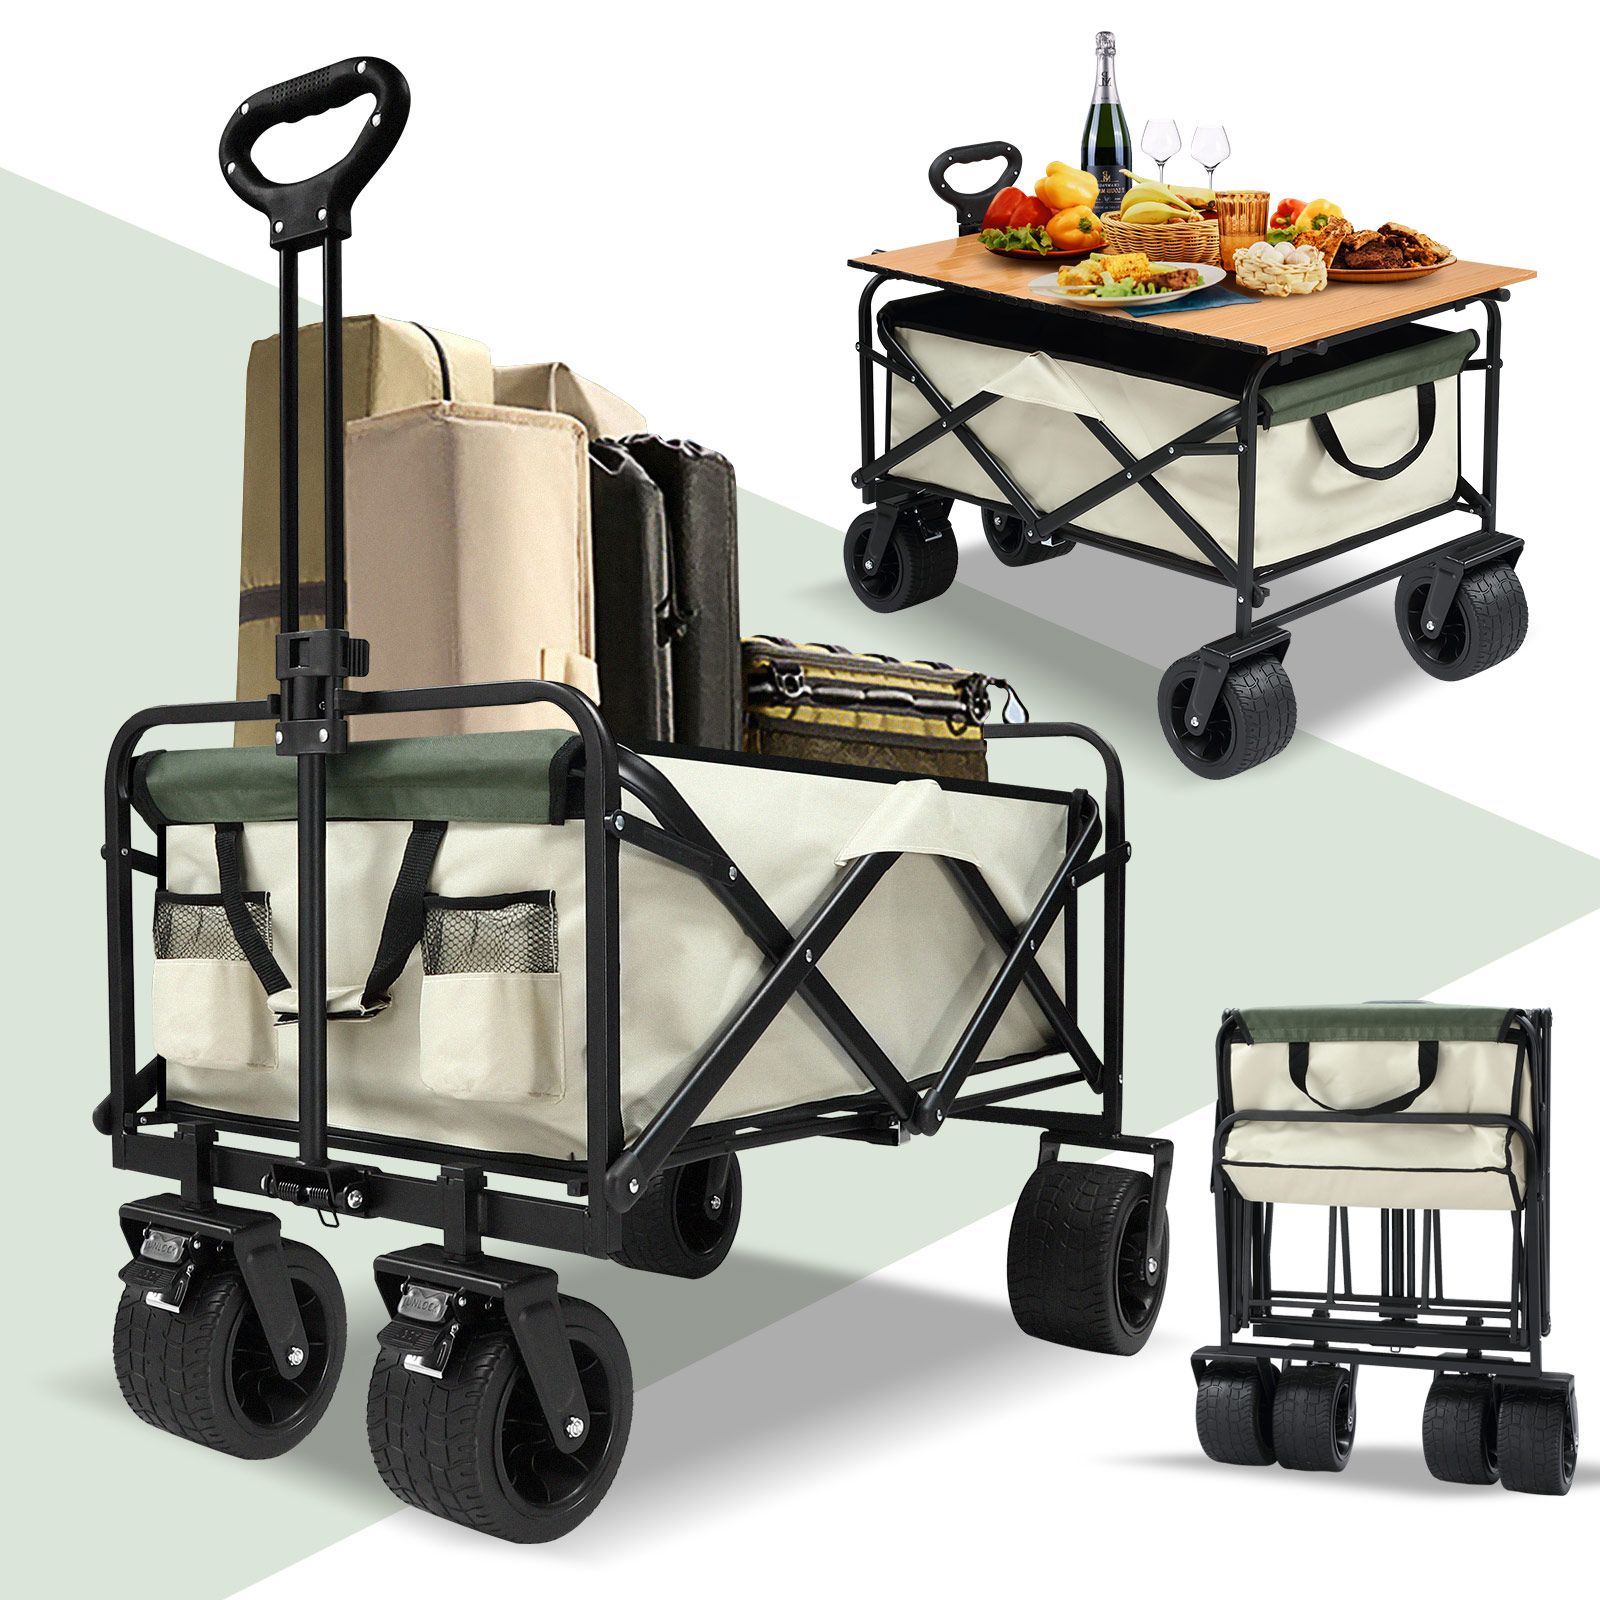 Garden Beach Cart Wagon Foldable Utility Shopping Trolley Trailer Outdoor Picnic Camping Sports Market Barrow Luggage Grocery Collapsible 150kg